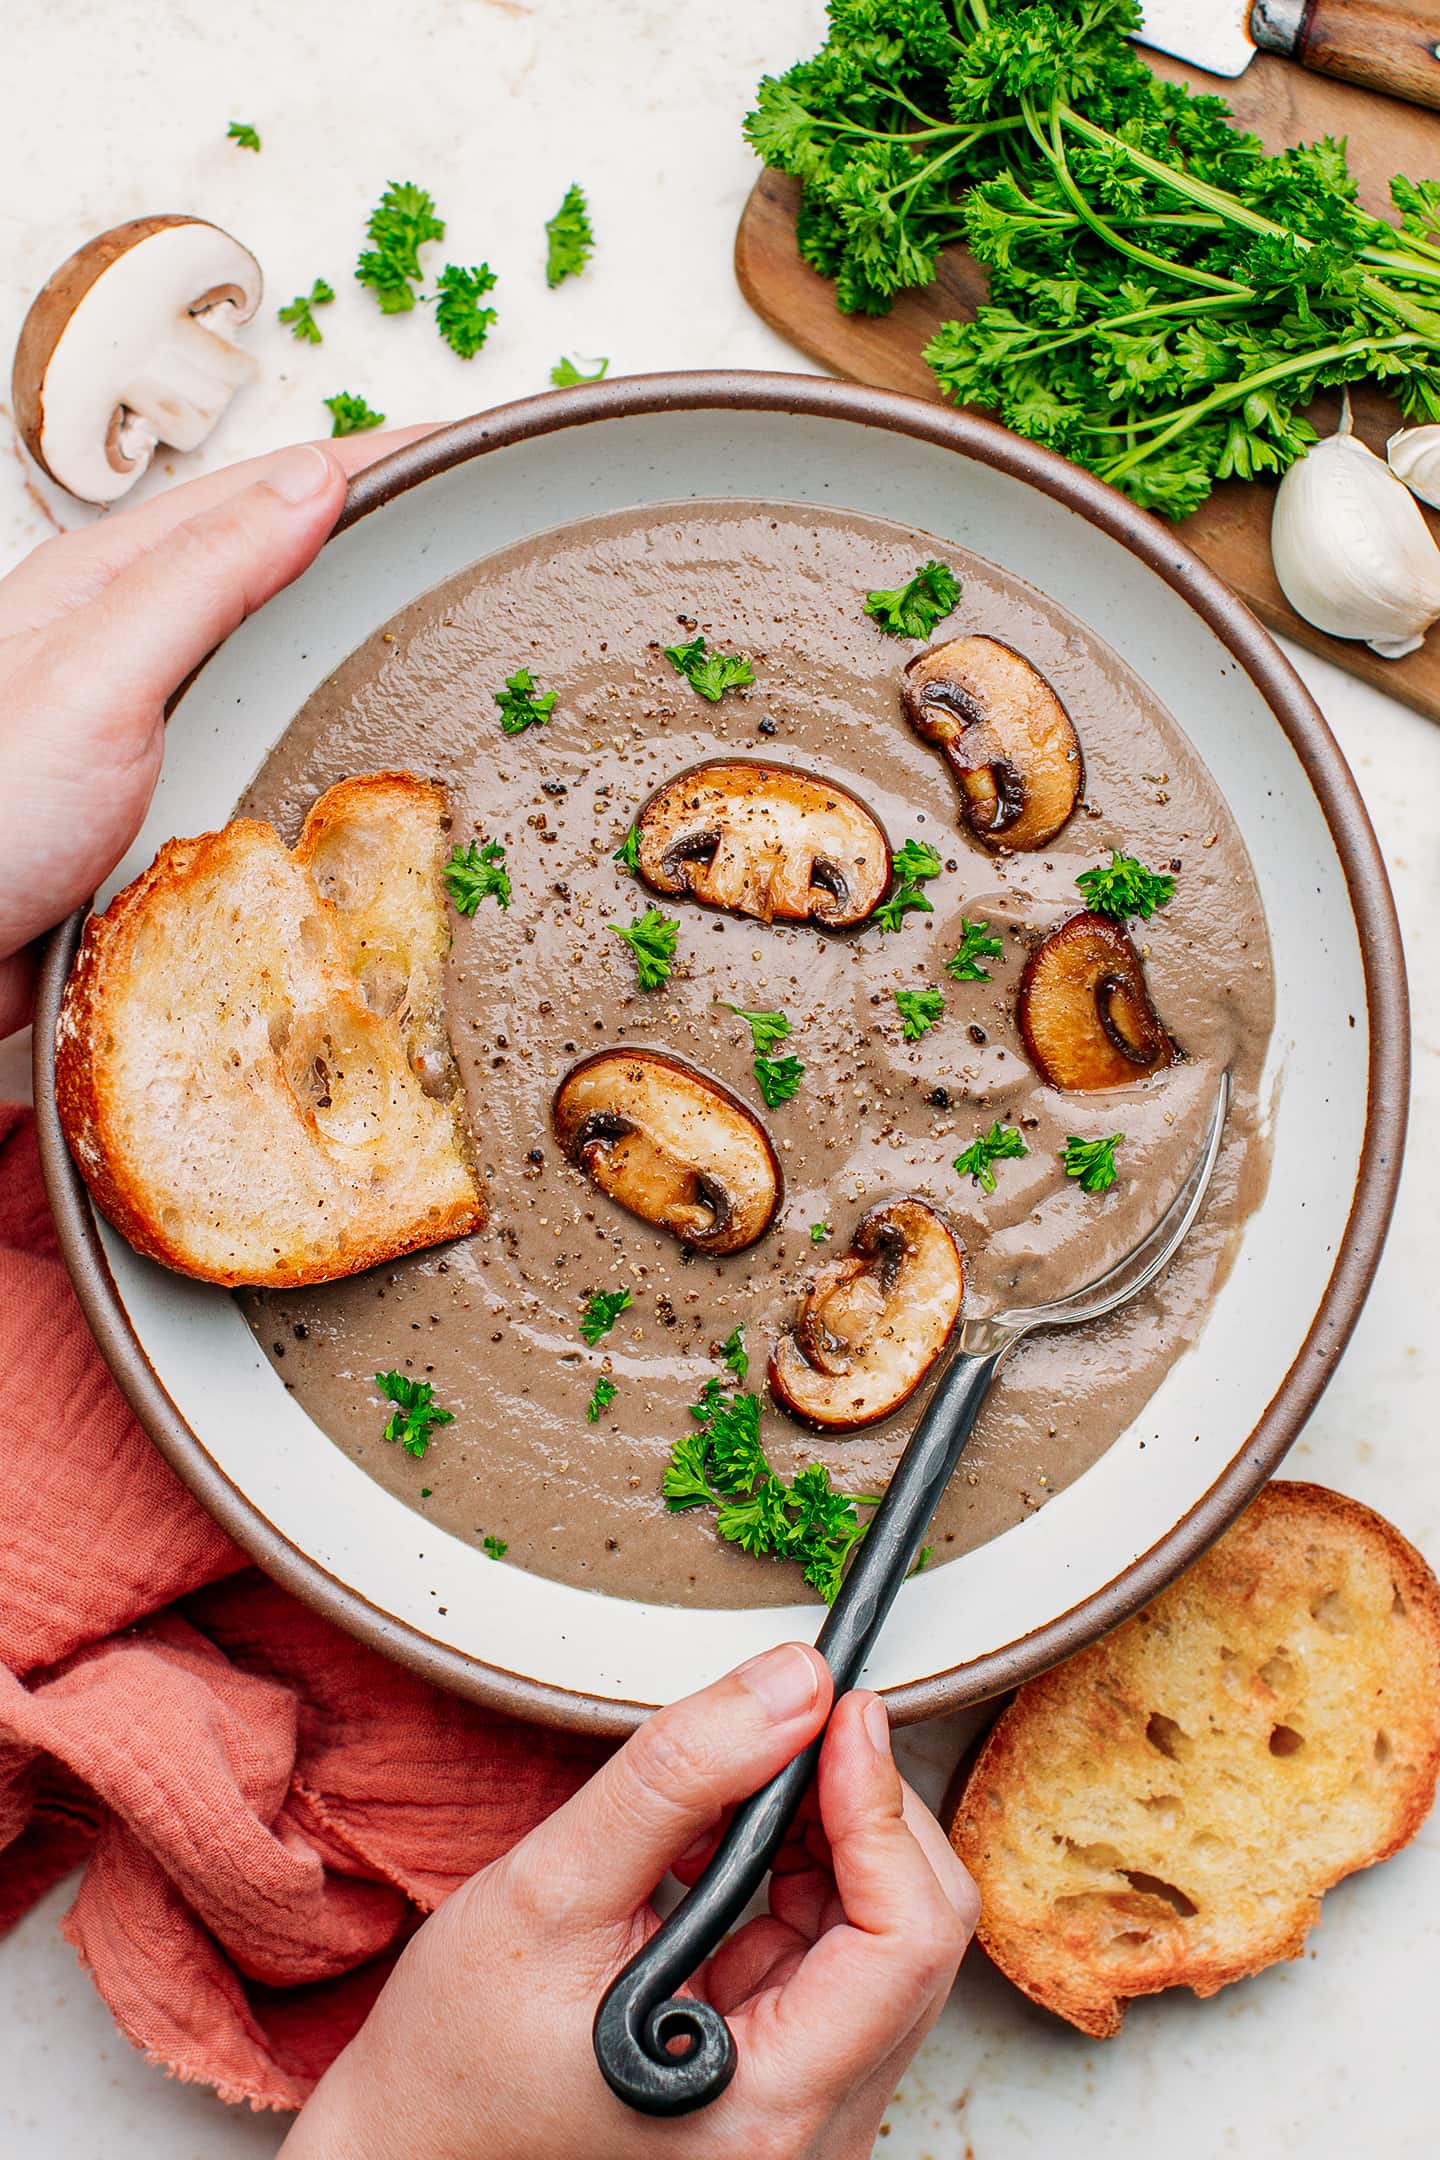 Holding a bowl of mushroom soup with bread slices.